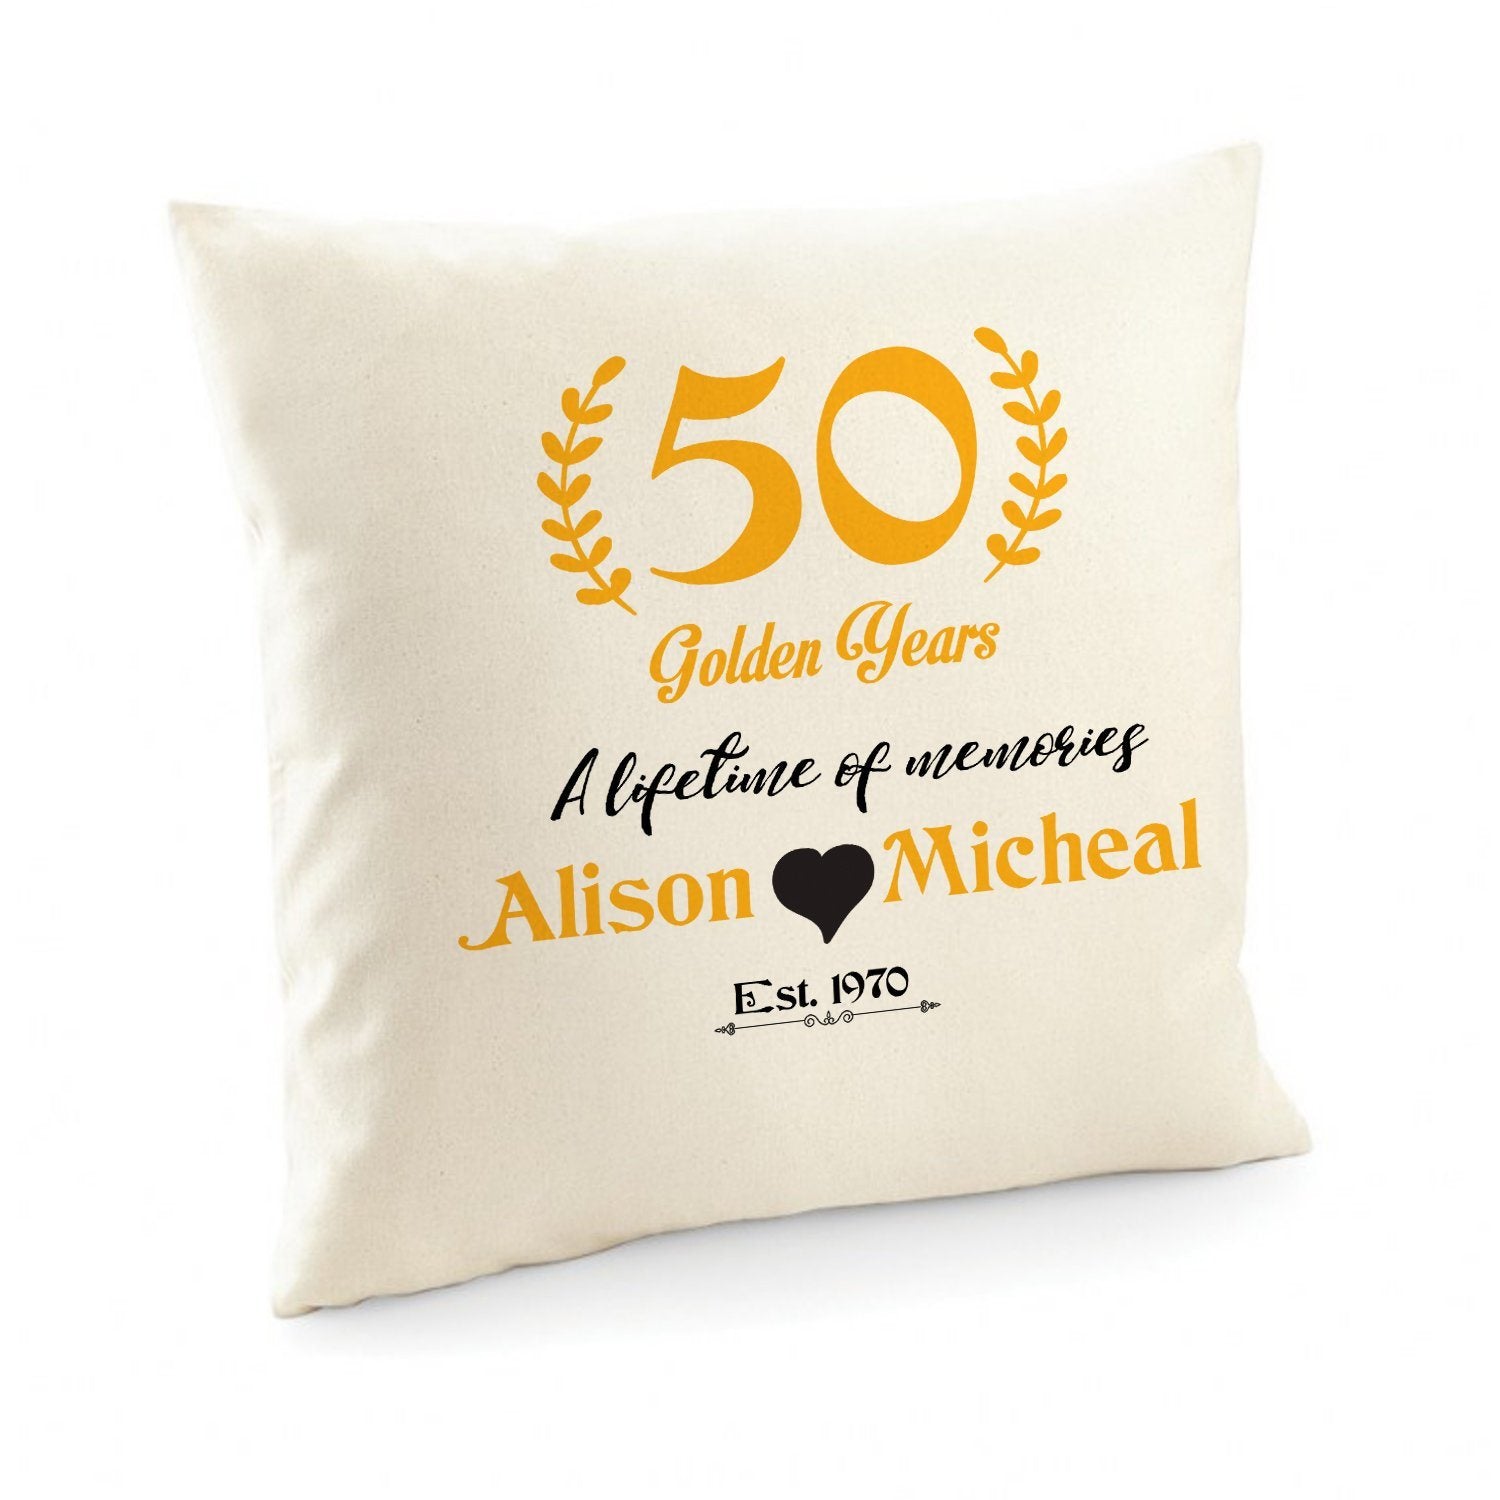 50 golden years cushion cover, Personalised wedding anniversary gift